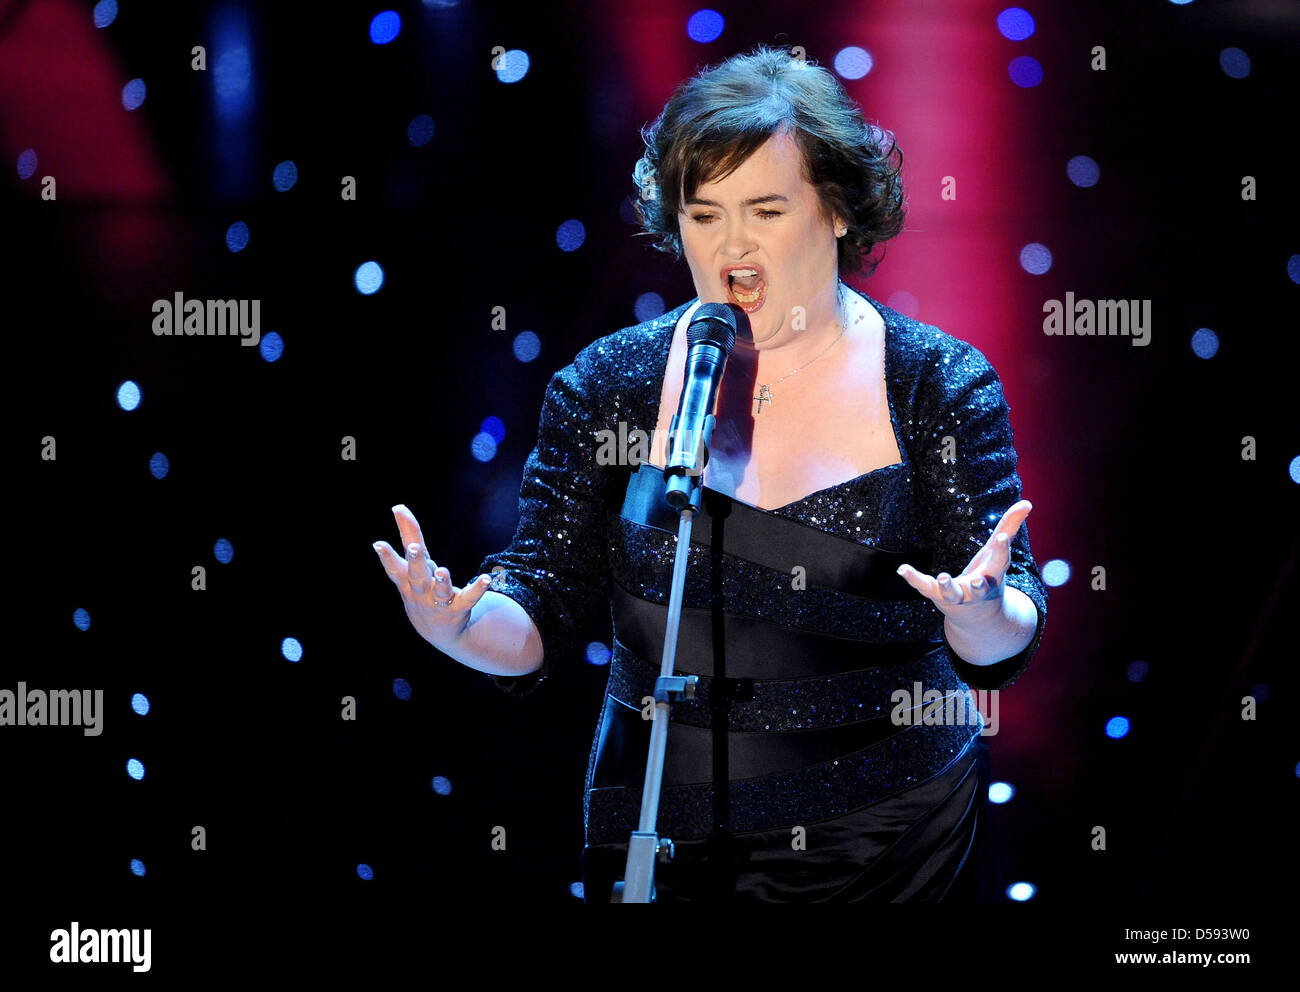 Britain's Got Talent winner Susan Boyle performs in San Remo, Italy, 16 February 2010. Scotland's Catholic Church releases that Boyle shall perform when Pope Benedict XVI visits Scotland from 16 to 19 September. Photo: Claudio Onorati Stock Photo